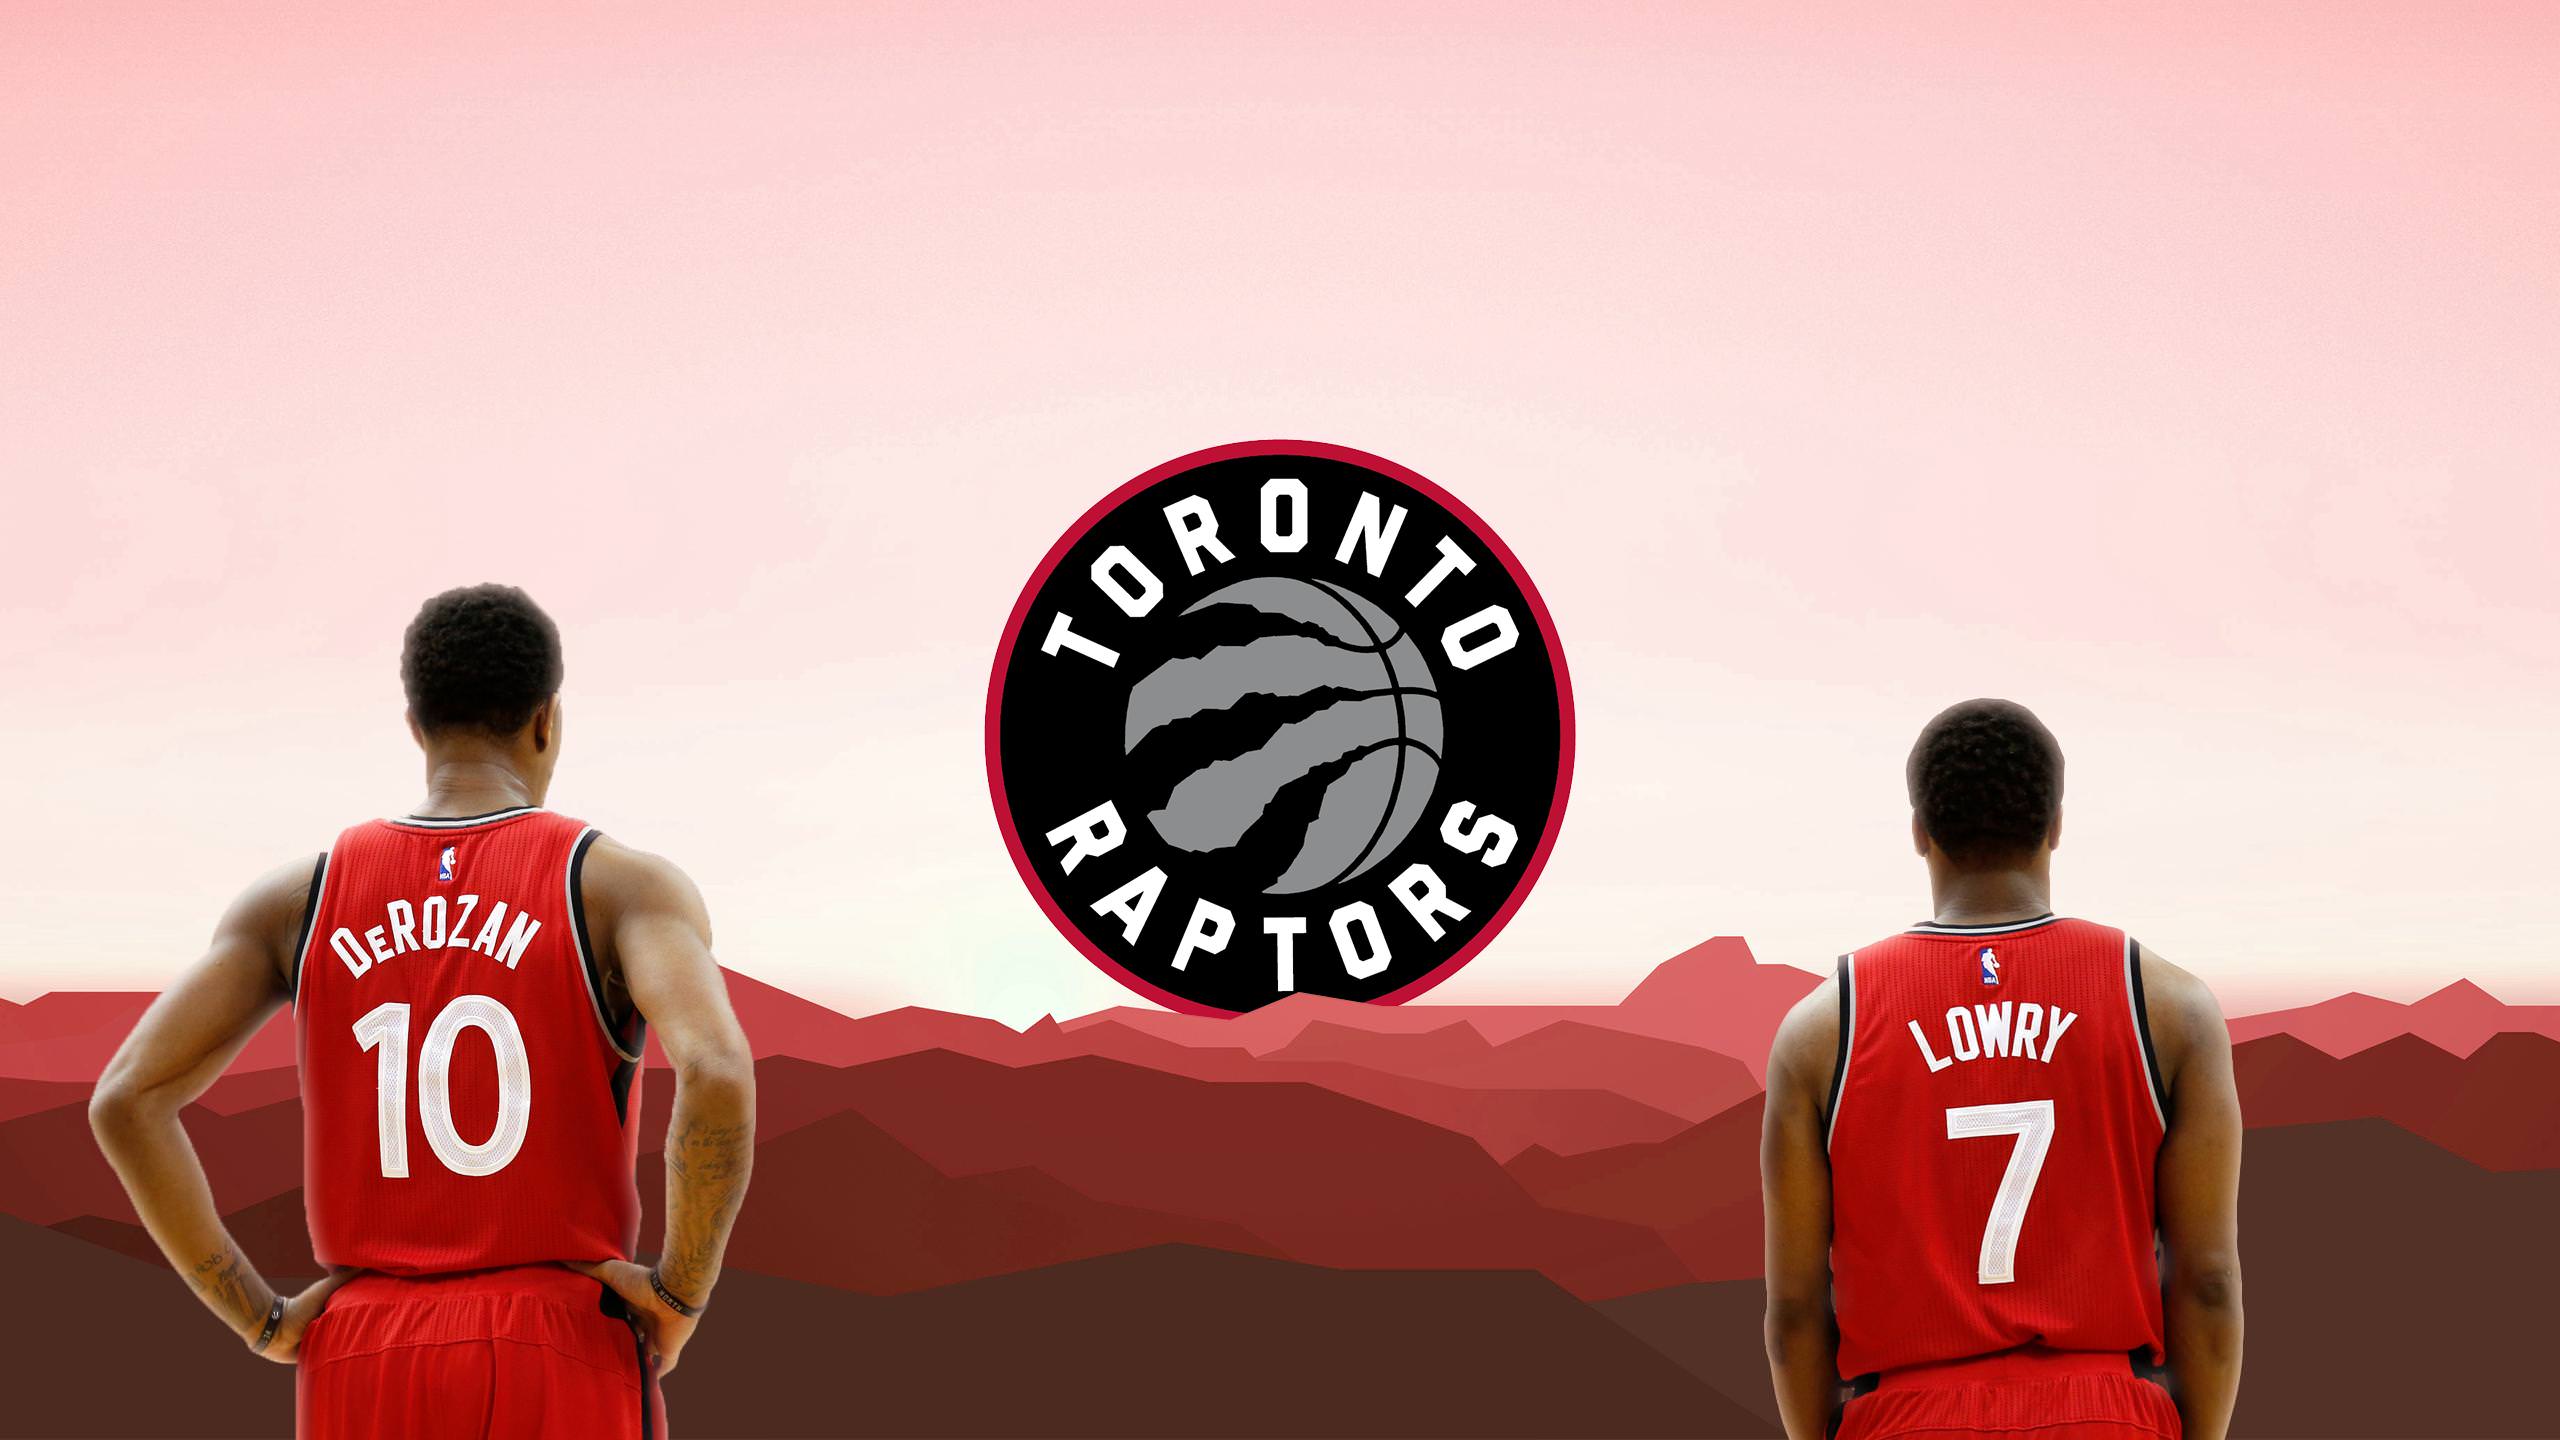 Kyle Lowry Wallpapers - Wallpaper Cave